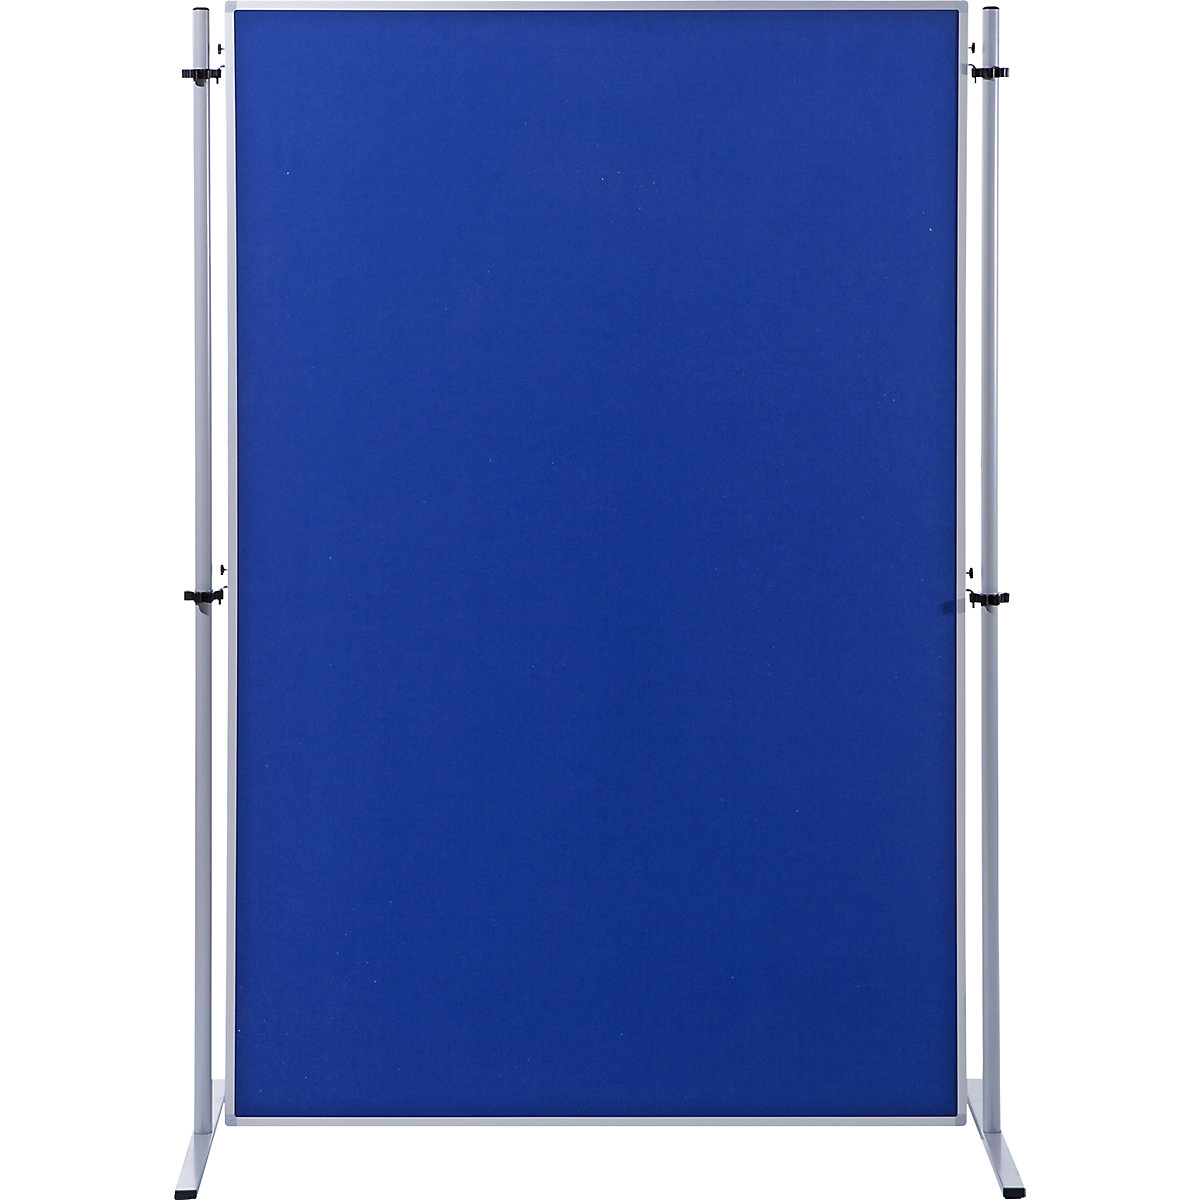 Functional partitions – eurokraft basic, fabric cover, HxW 1800 x 1200 mm, royal blue, pack of 1-11